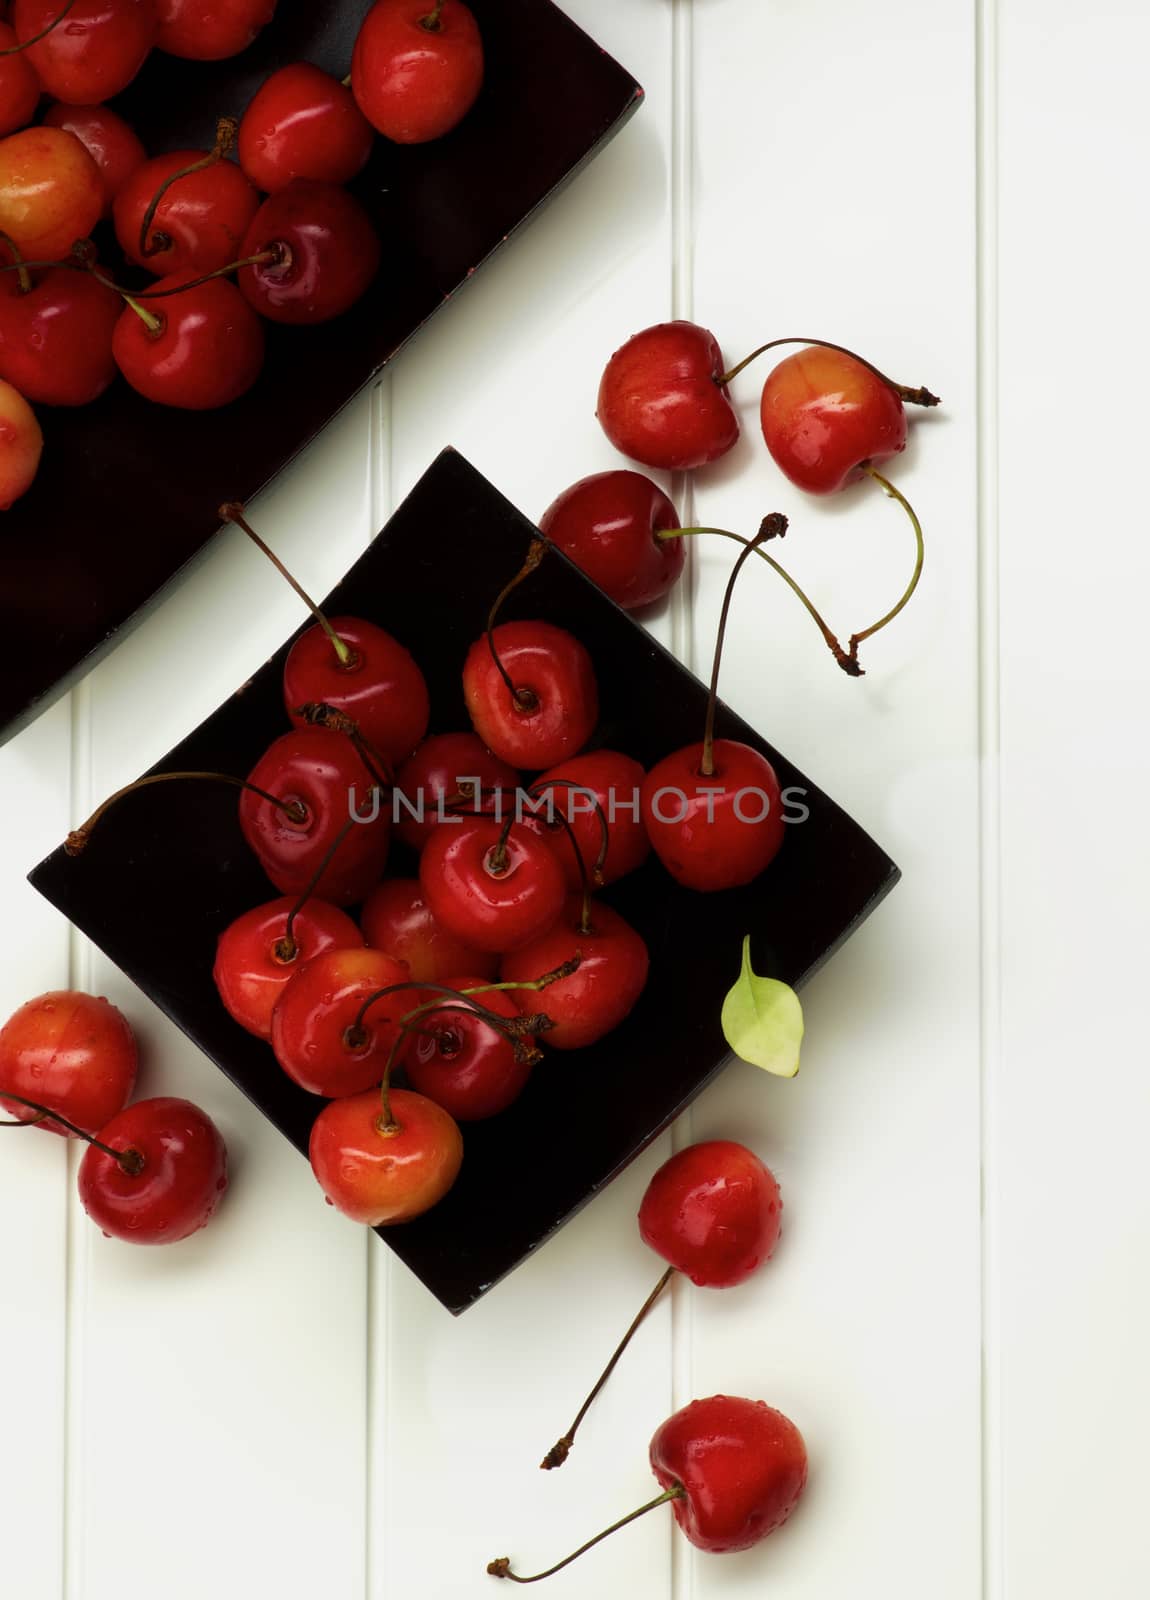 Arrangement of Two Black Plates with Fresh Ripe Sweet Maraschino Cherries closeup on Plank White background. Top View